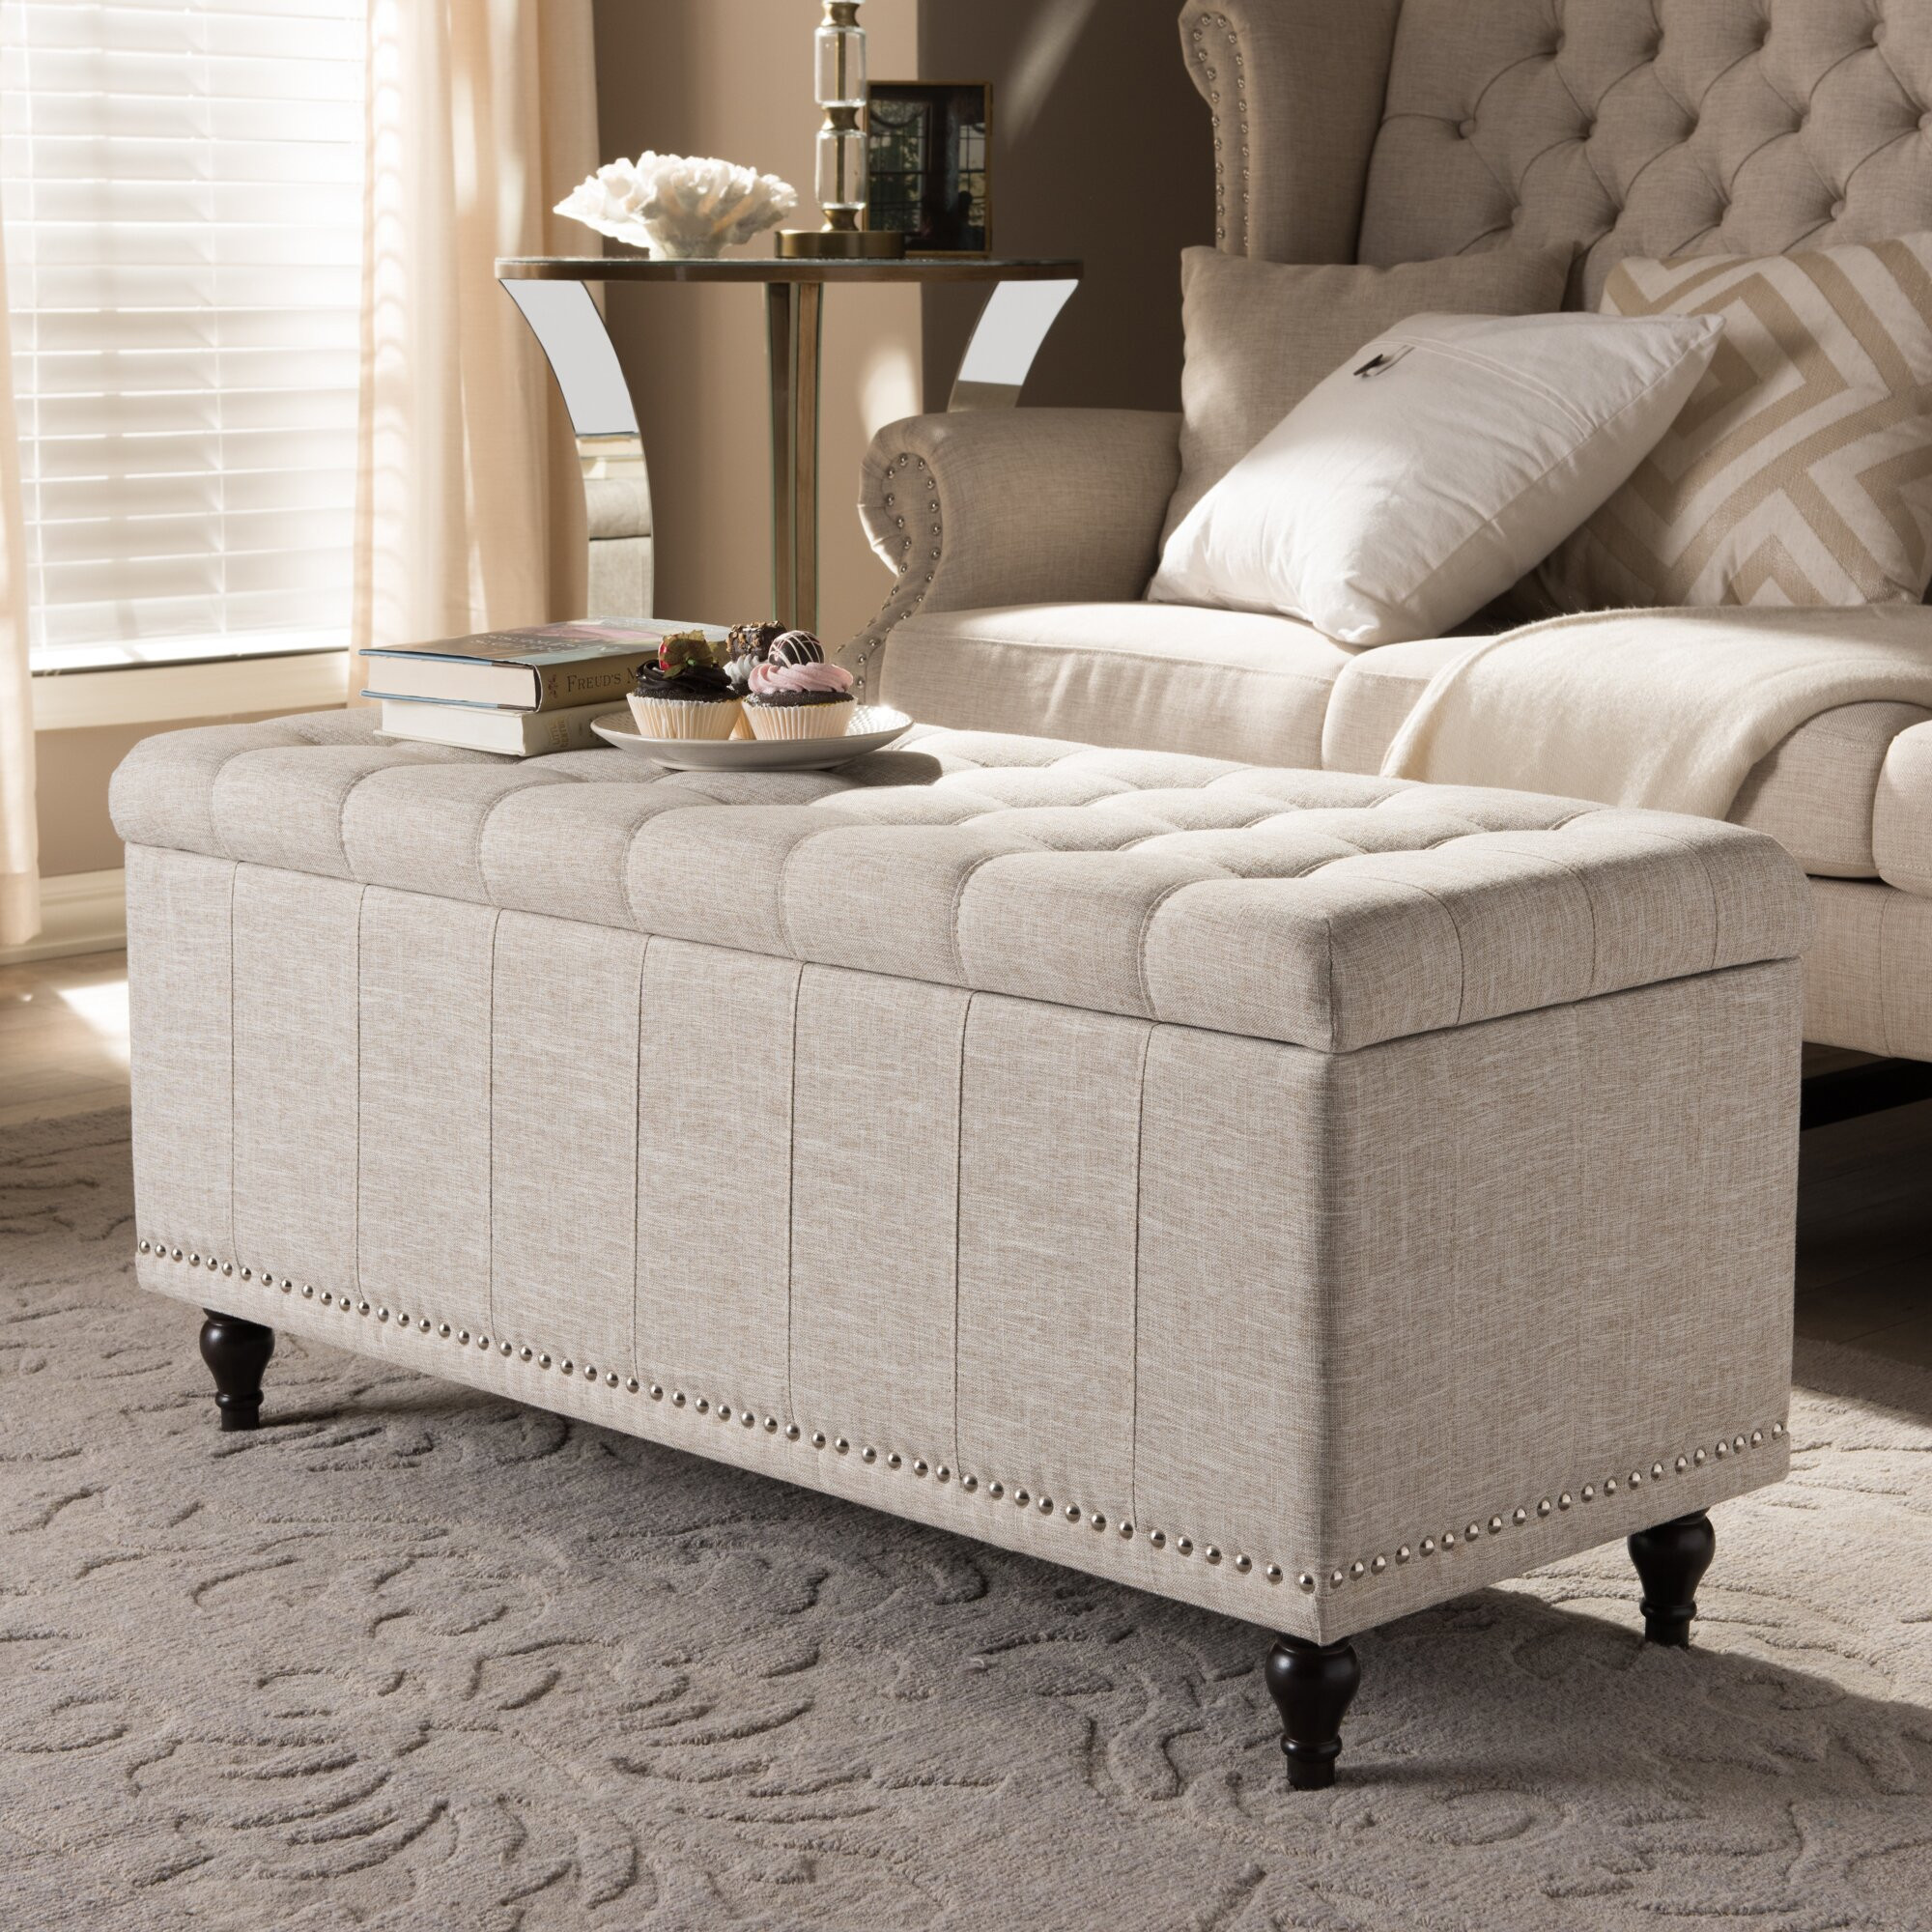 Top 10 Stylish Bedroom Upholstered Benches On The Market